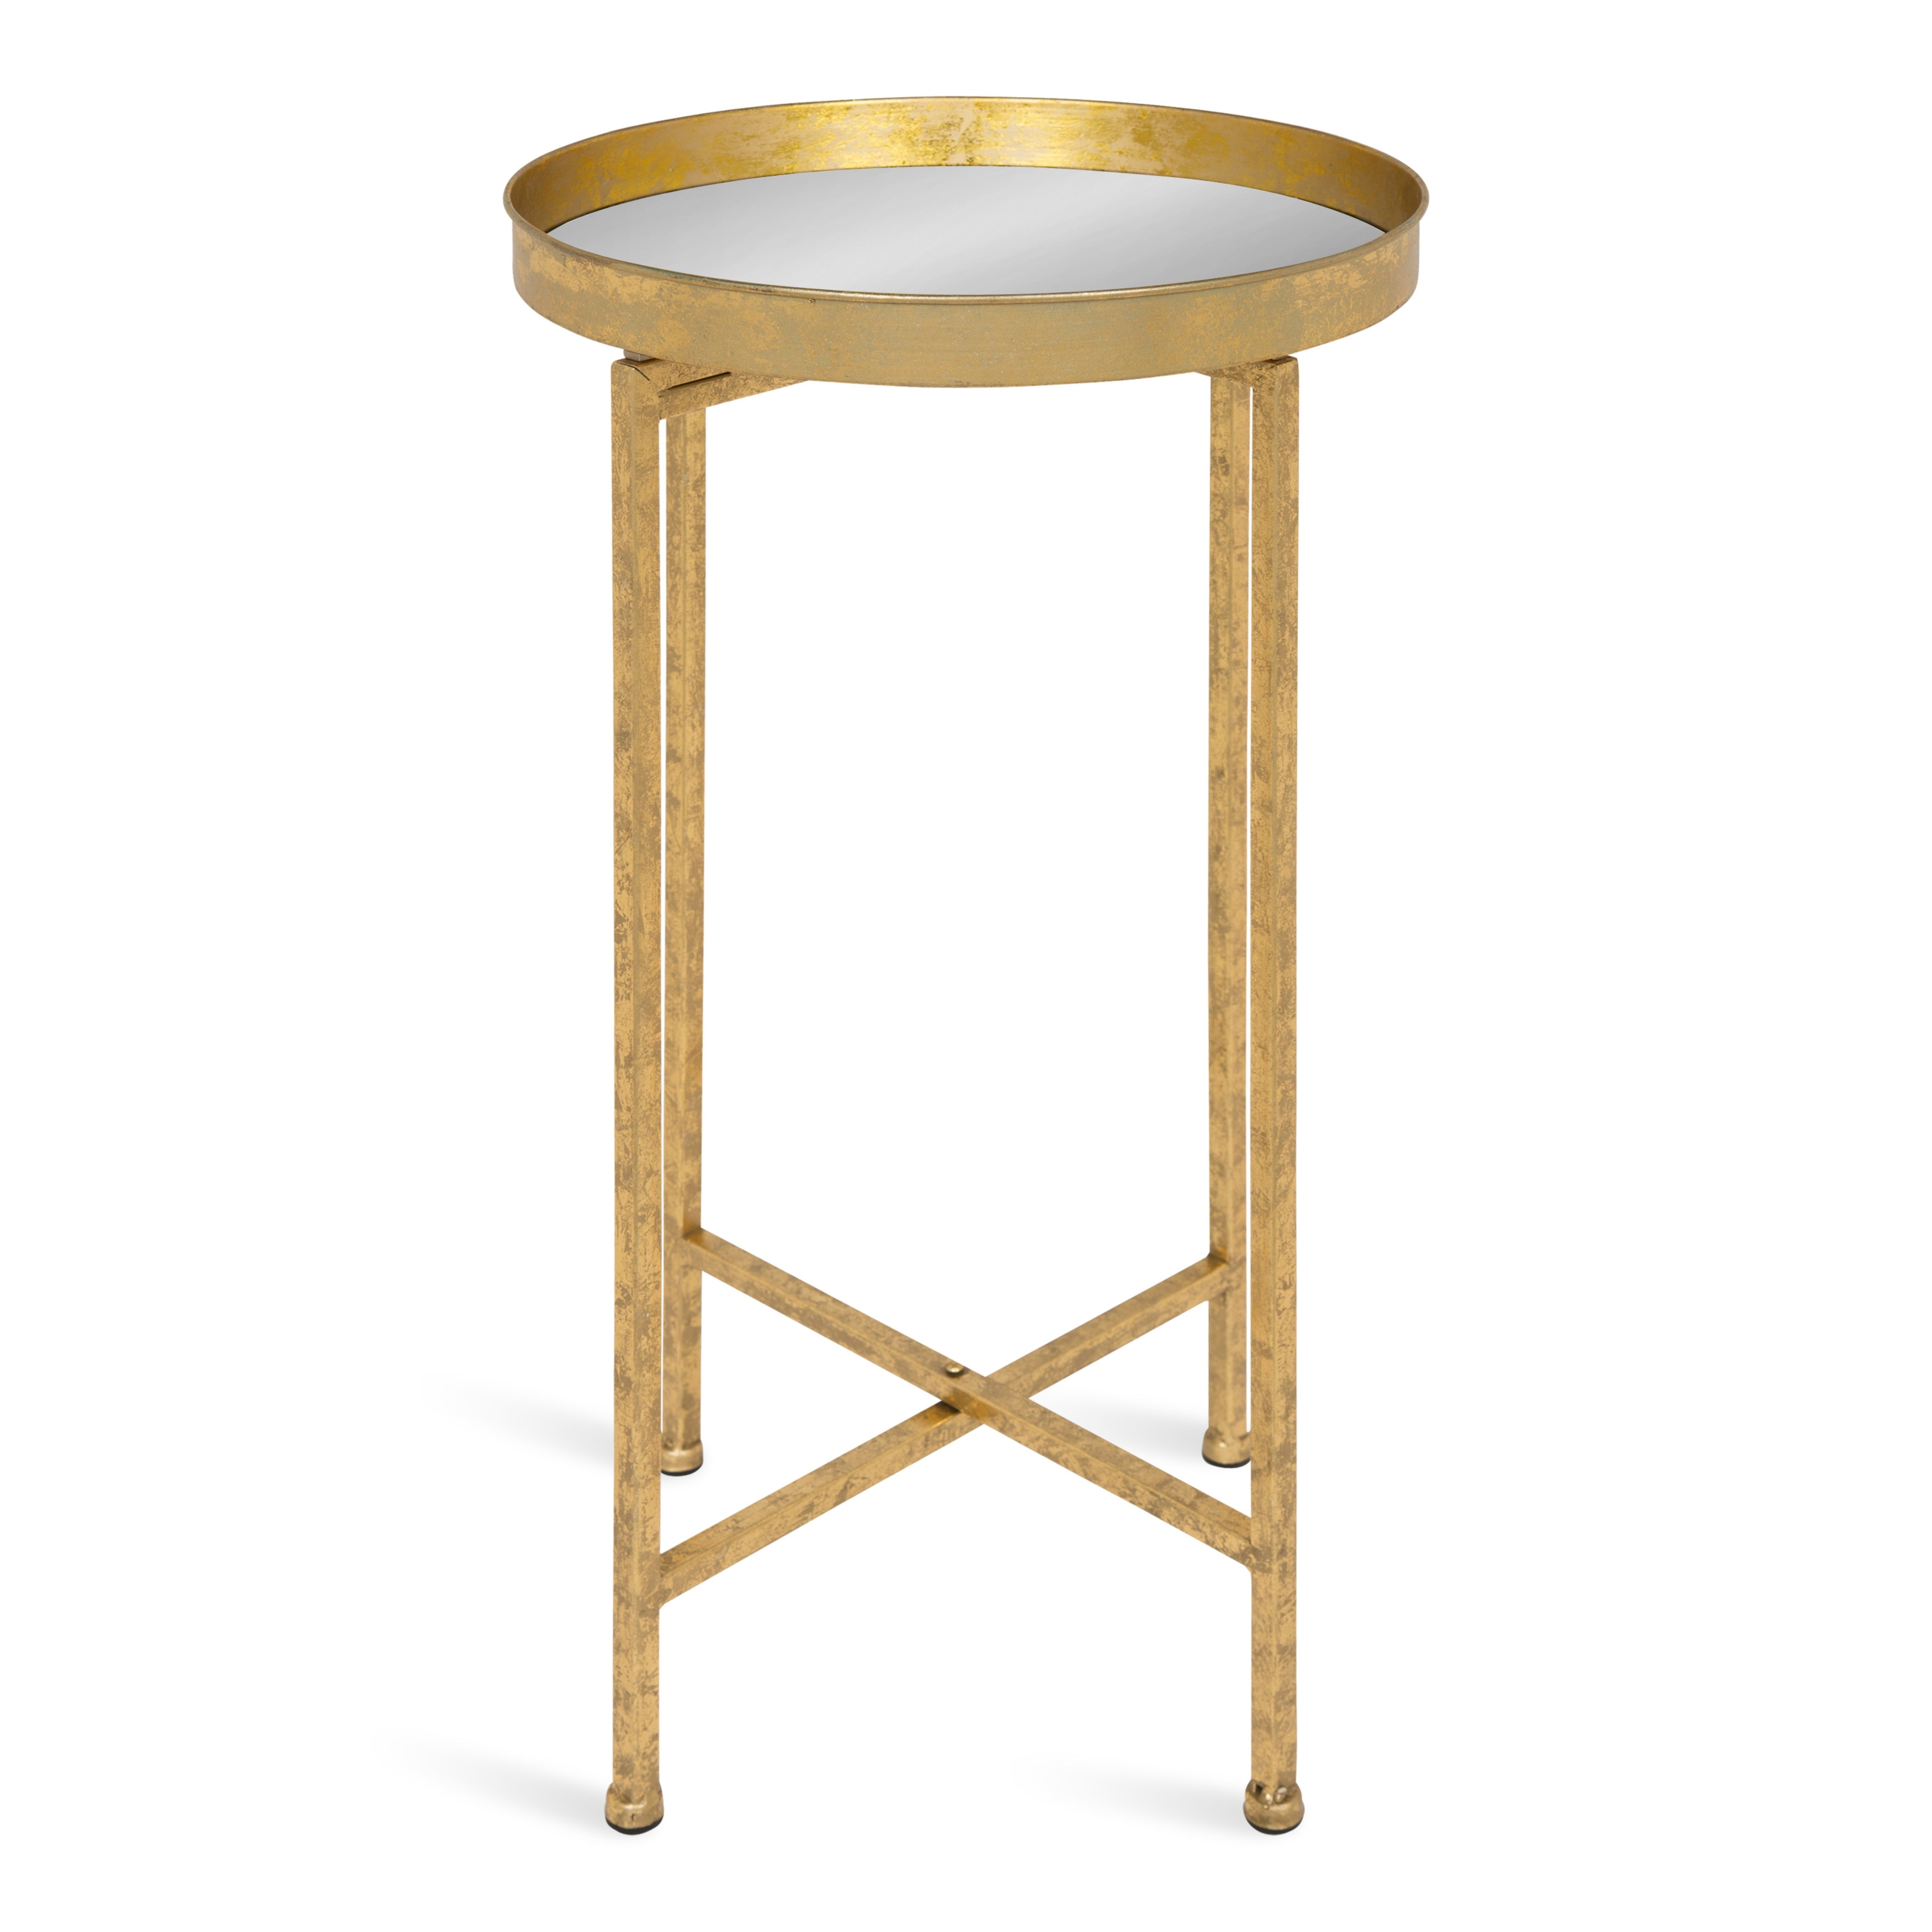 Pink with Gold Base Kate and Laurel Celia Round Metal Foldable Tray Accent Table 